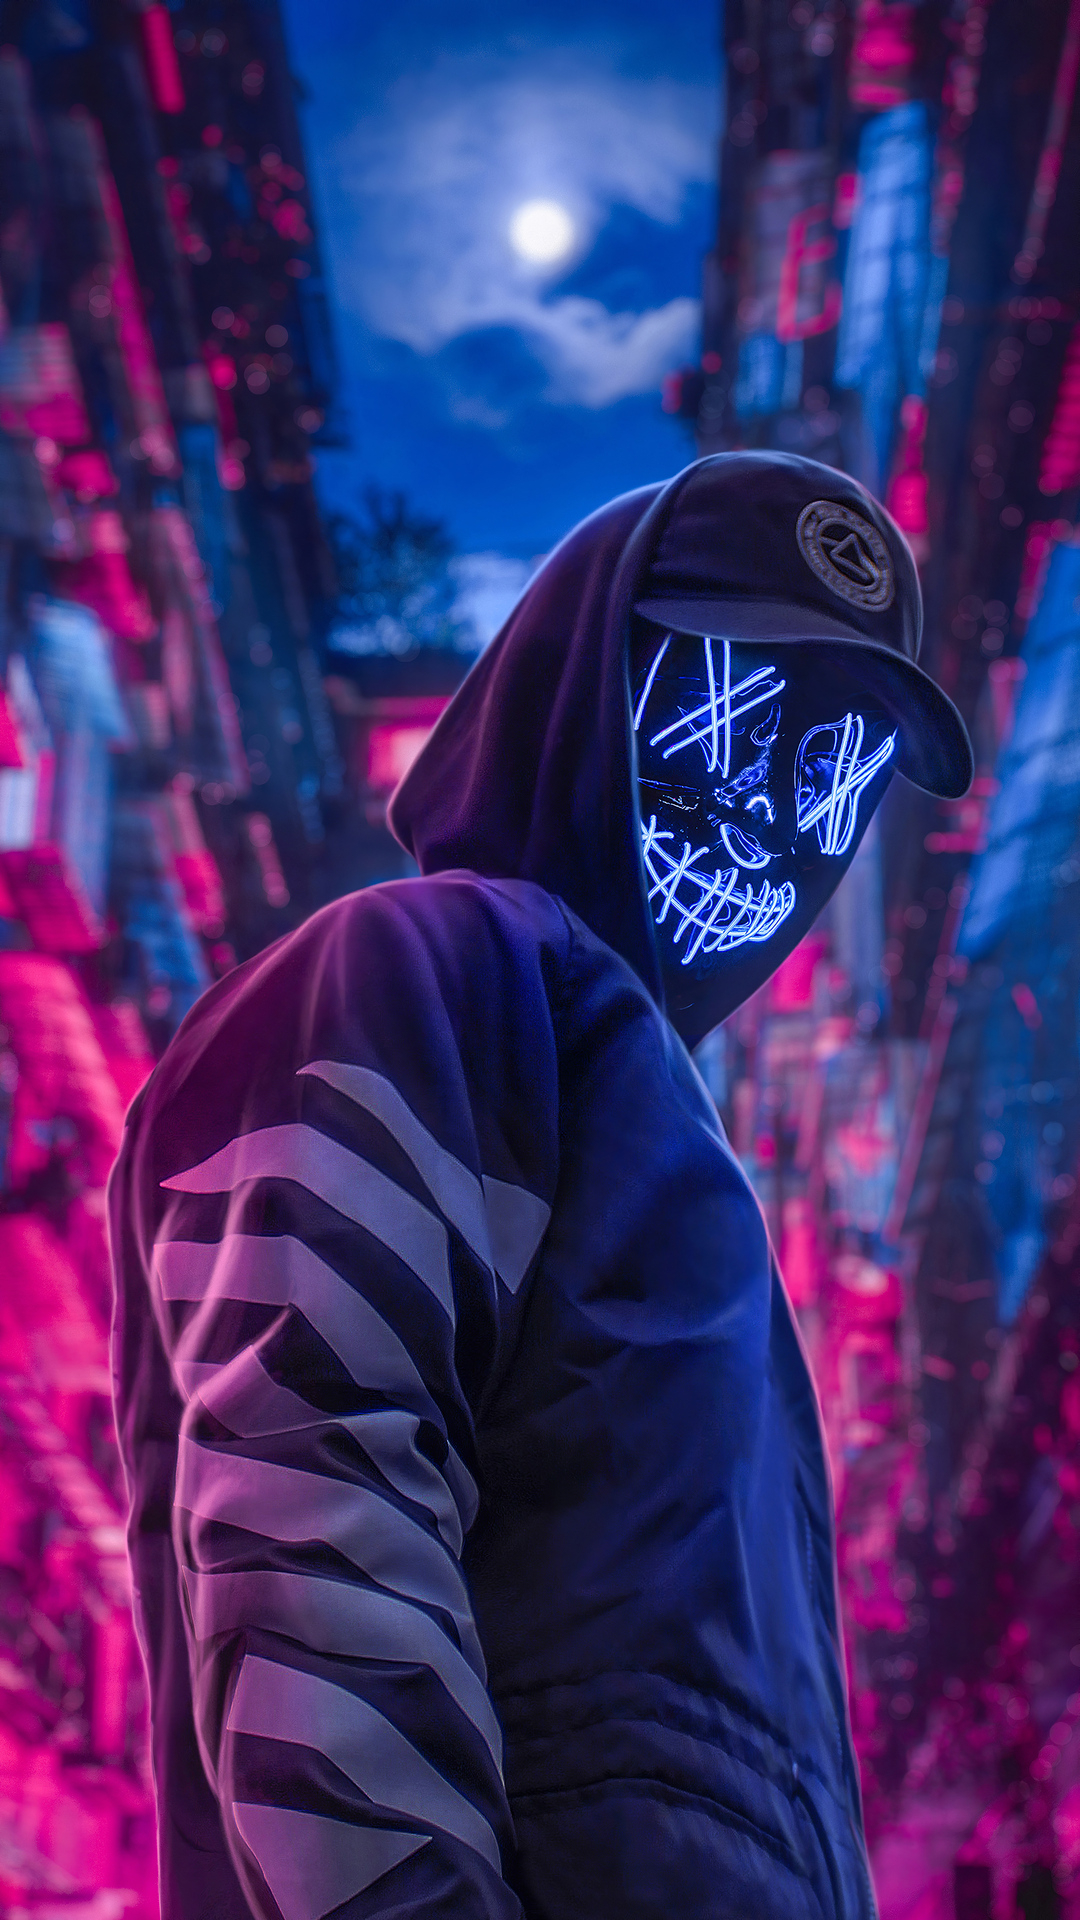 Neon Hoodie Hat Guy 4k iPhone 6s, 6 Plus, Pixel xl , One Plus 3t, 5 HD 4k Wallpaper, Image, Background, Photo and Picture